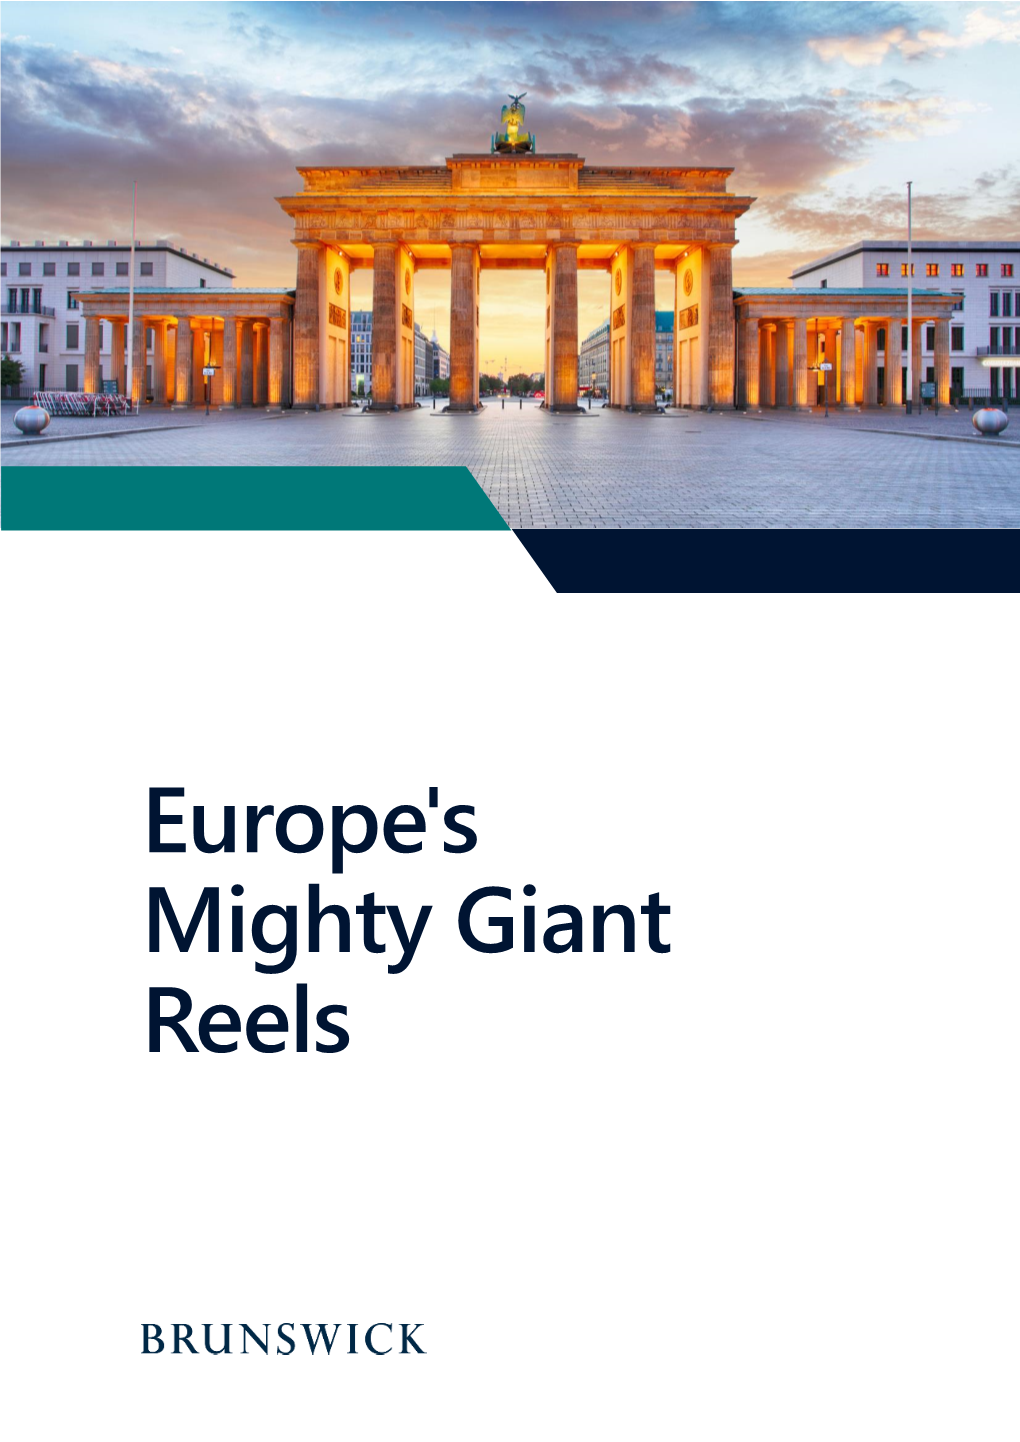 Europe's Mighty Giant Reels 2 Europe's Mighty Giant Reels